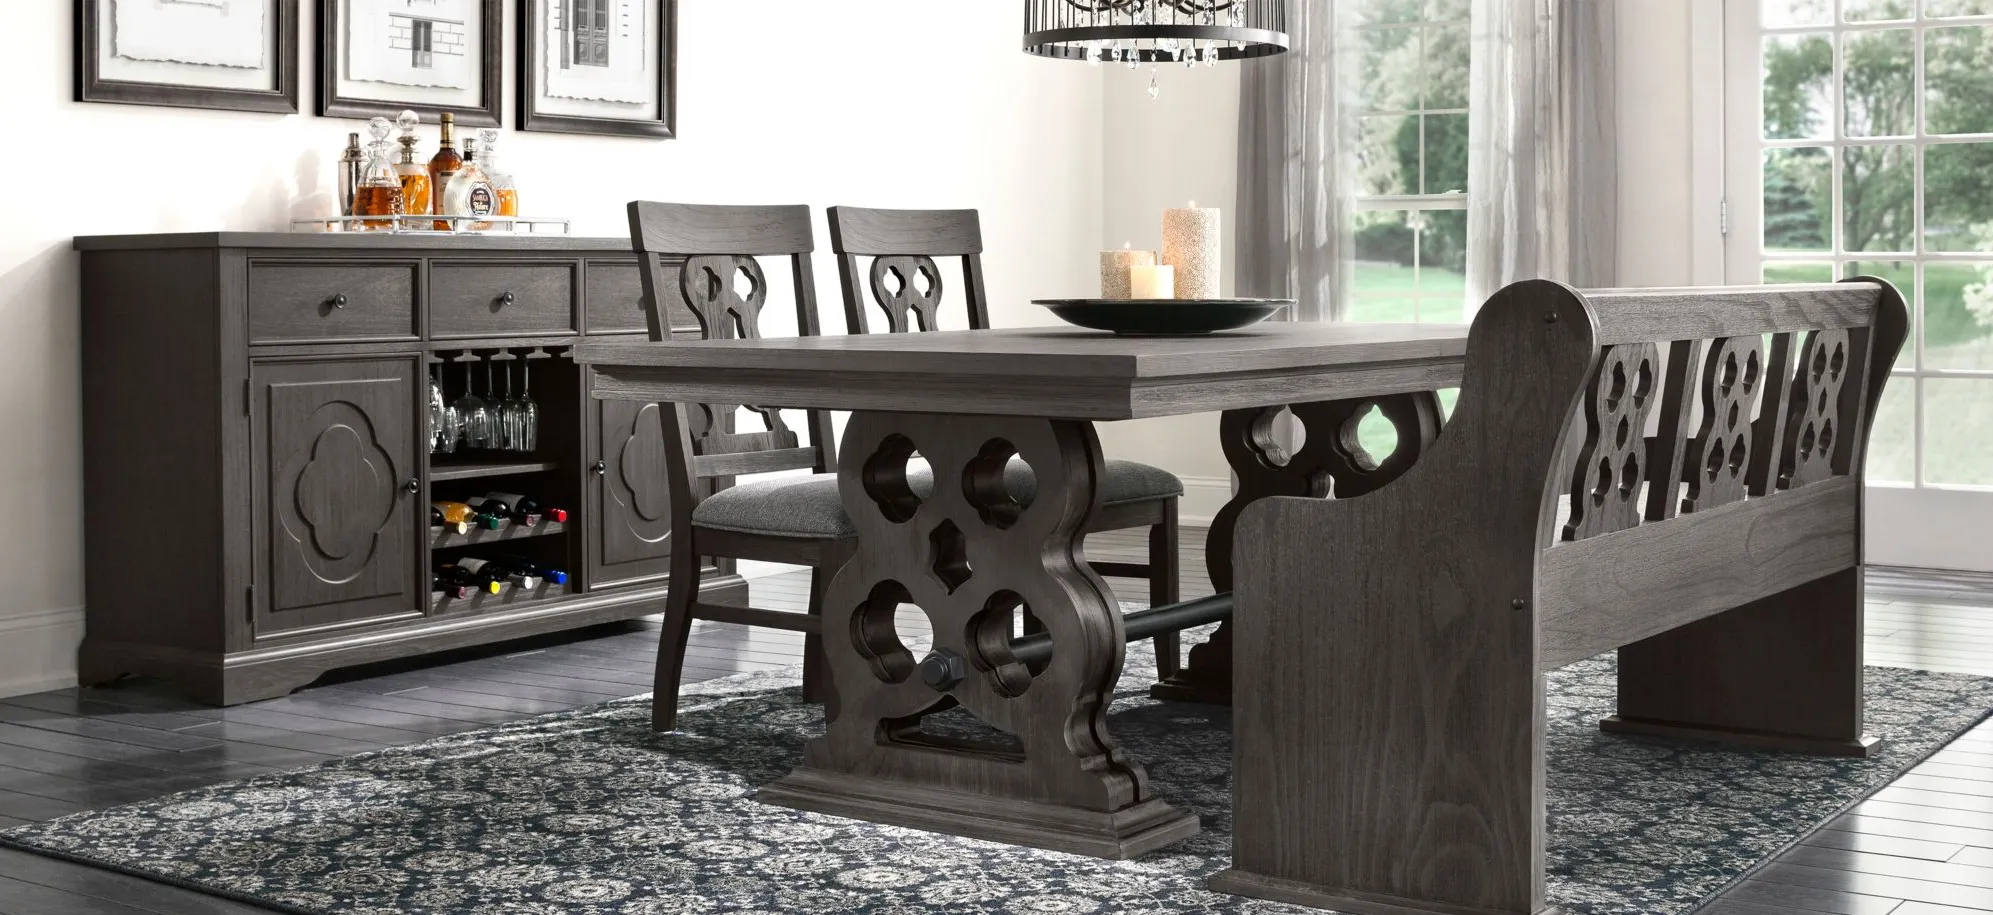 Belmore 4-pc Dining Set W/Bench in Gray / Espresso by Homelegance